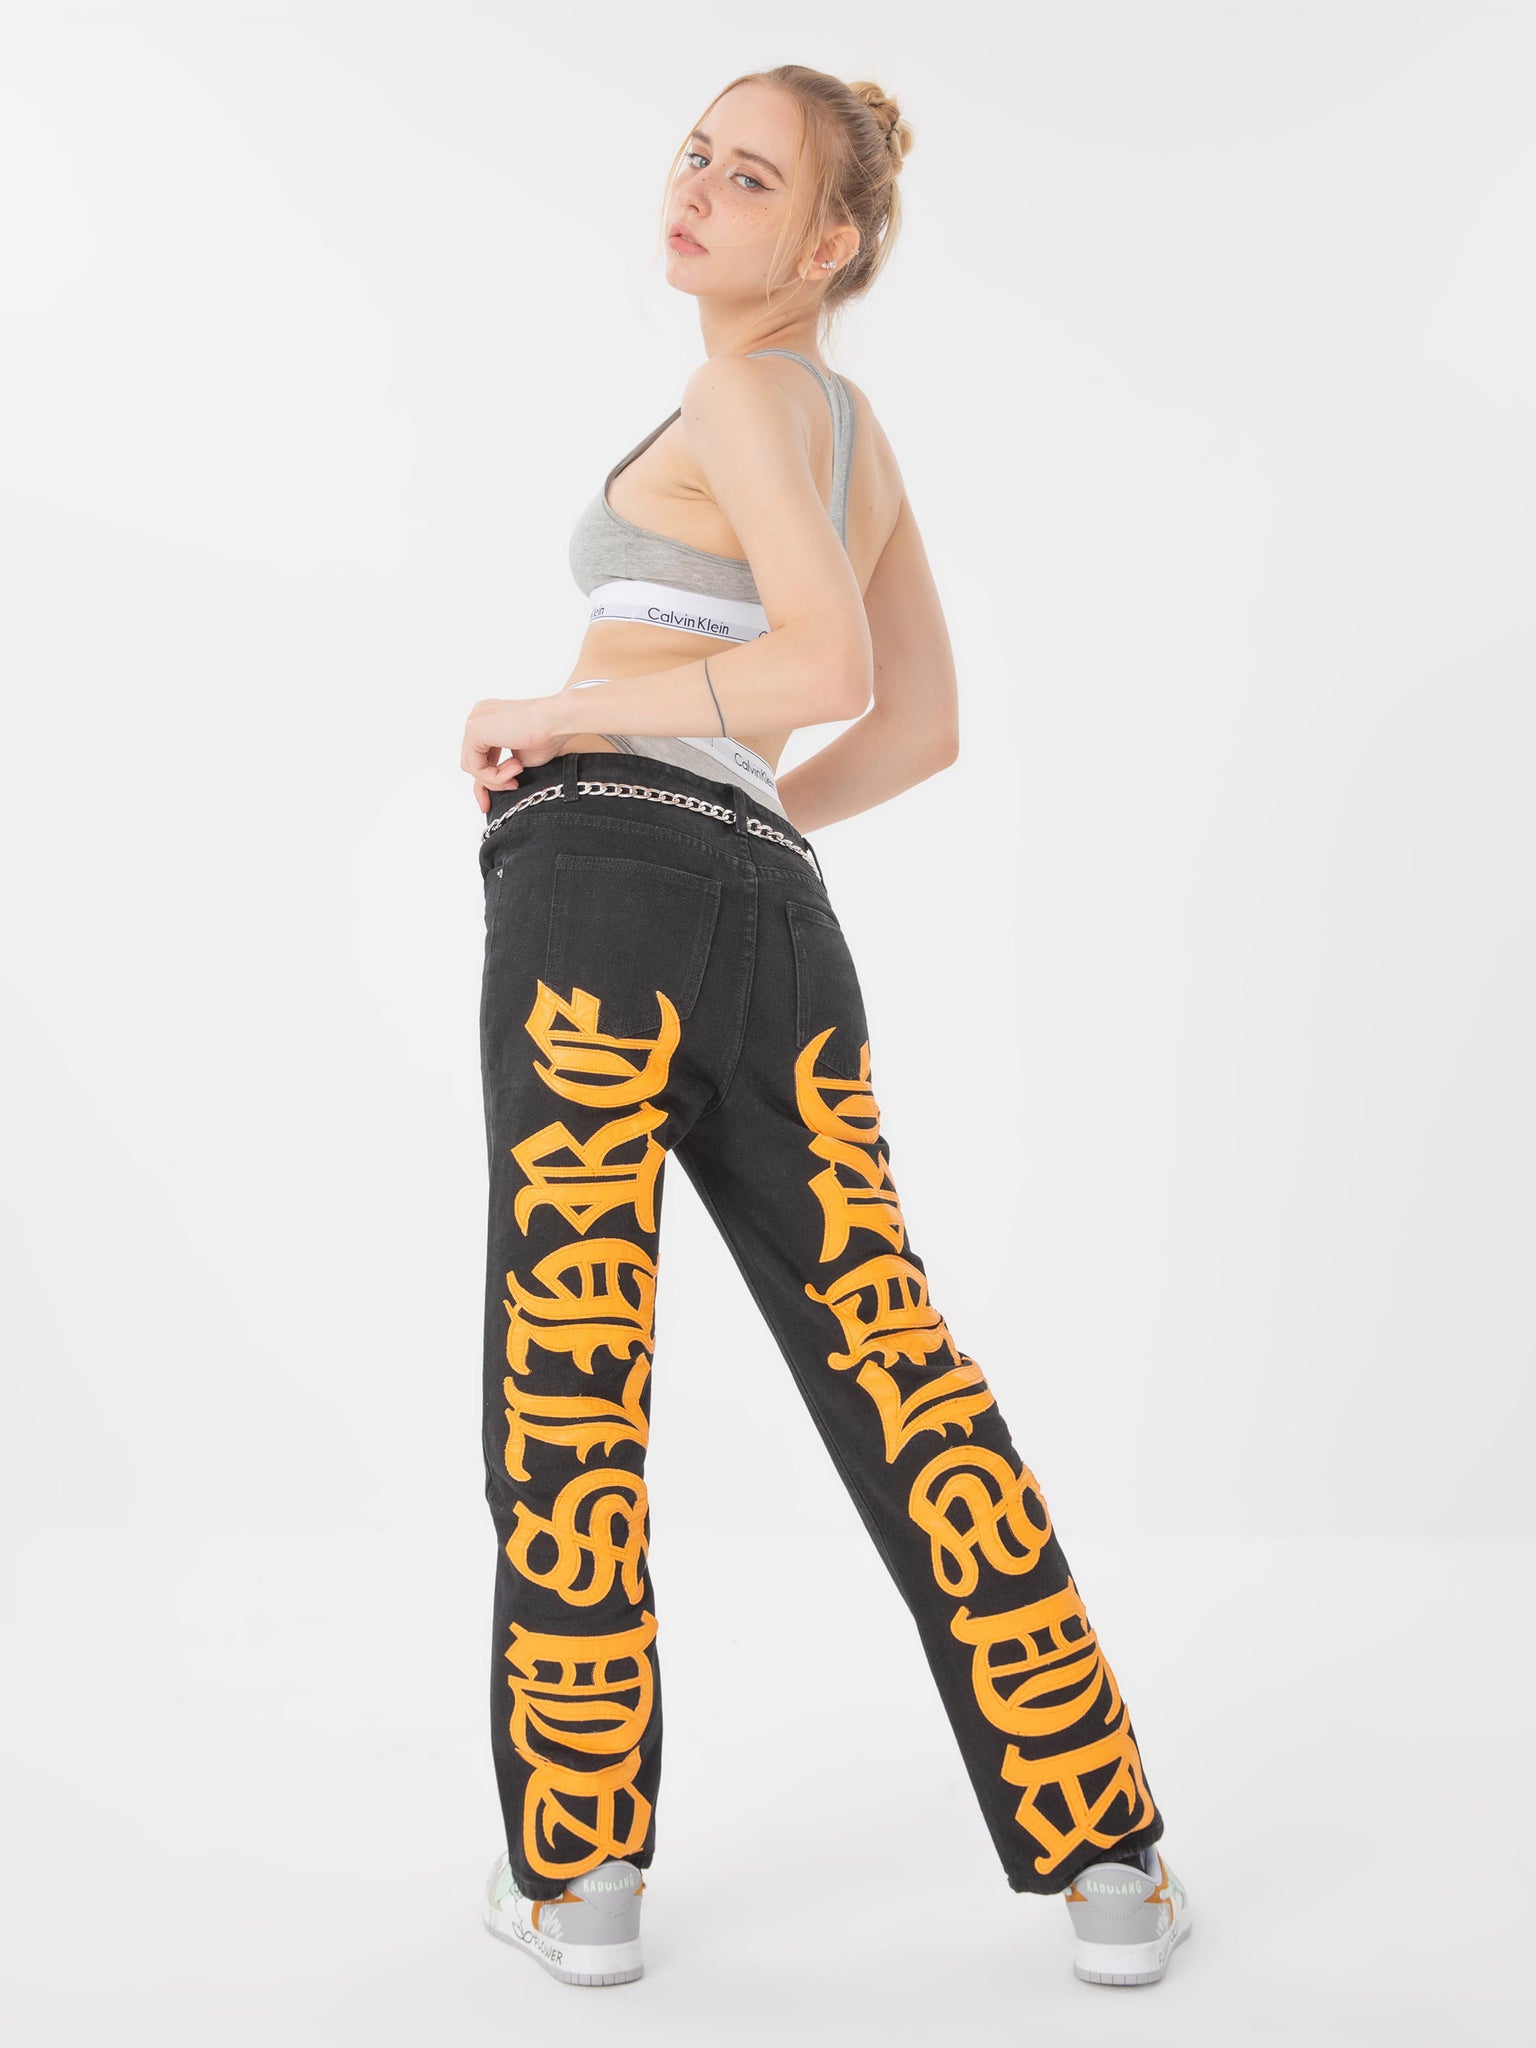 Thesupermade American High Street Burning Text Embroidered Letters Jeans -1478